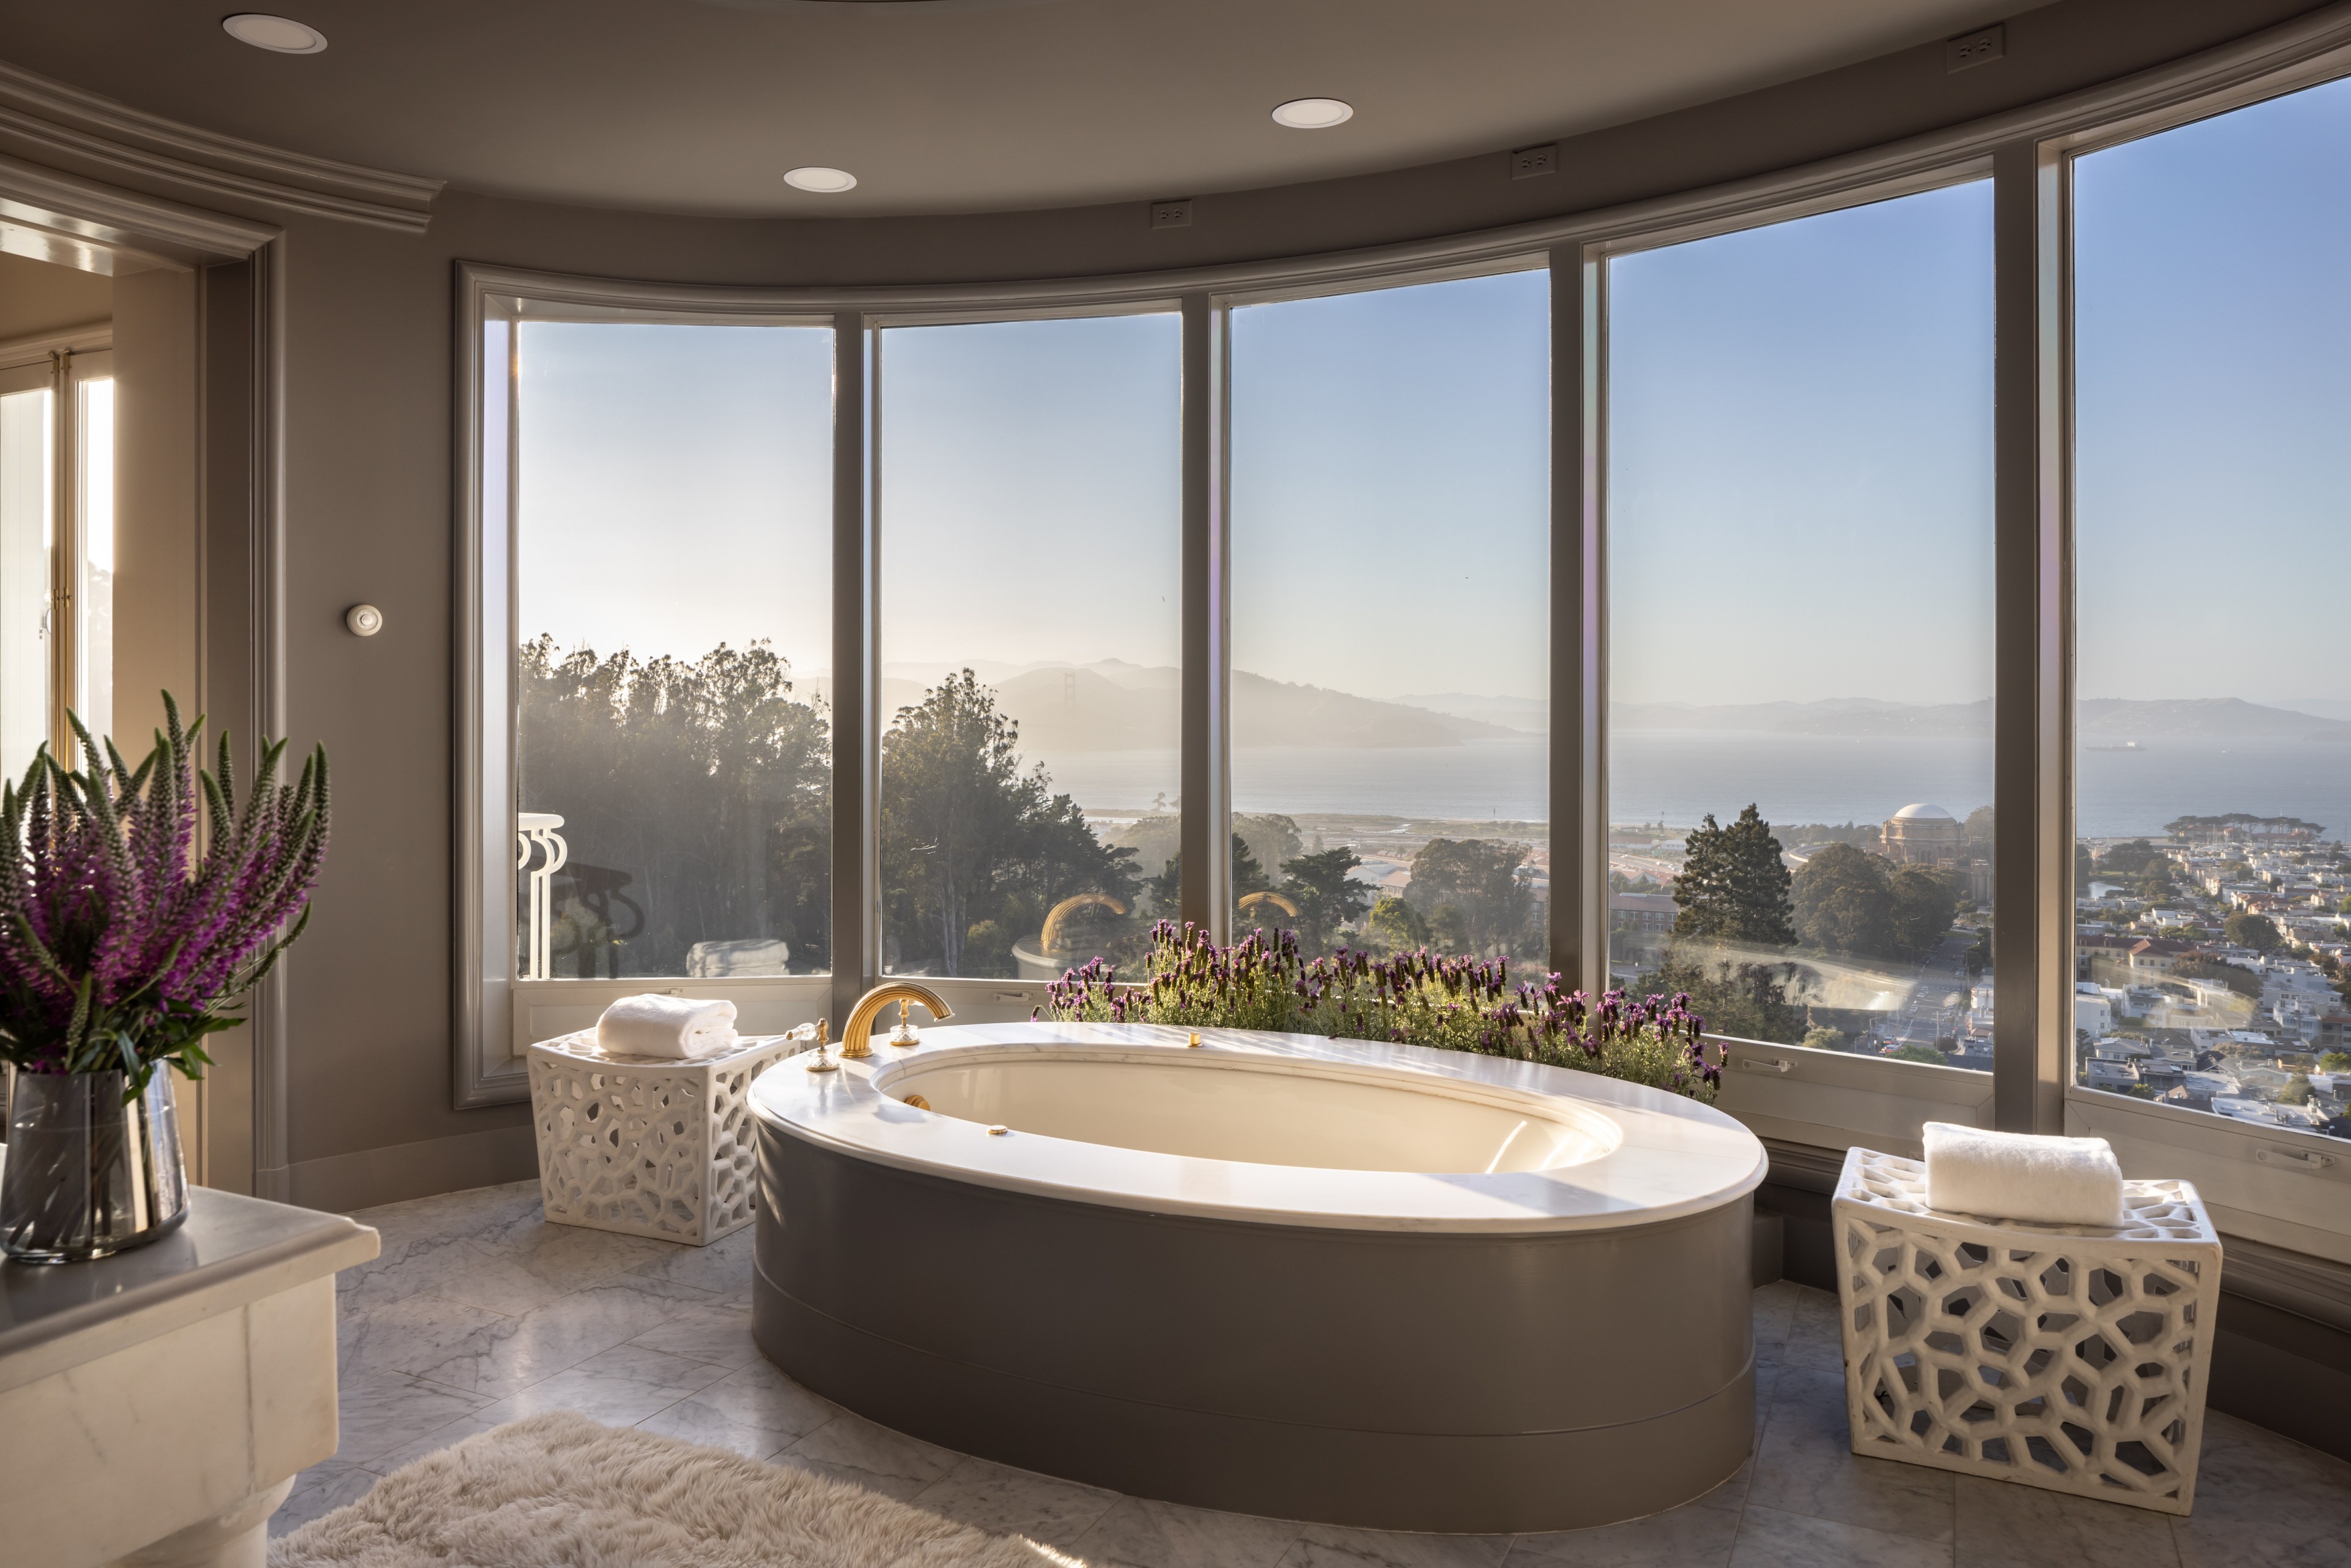 A luxurious bathroom features a large oval tub with a golden faucet and surrounding flowers, flanked by white geometric side tables with towels, set against wide windows showcasing a scenic ocean view.